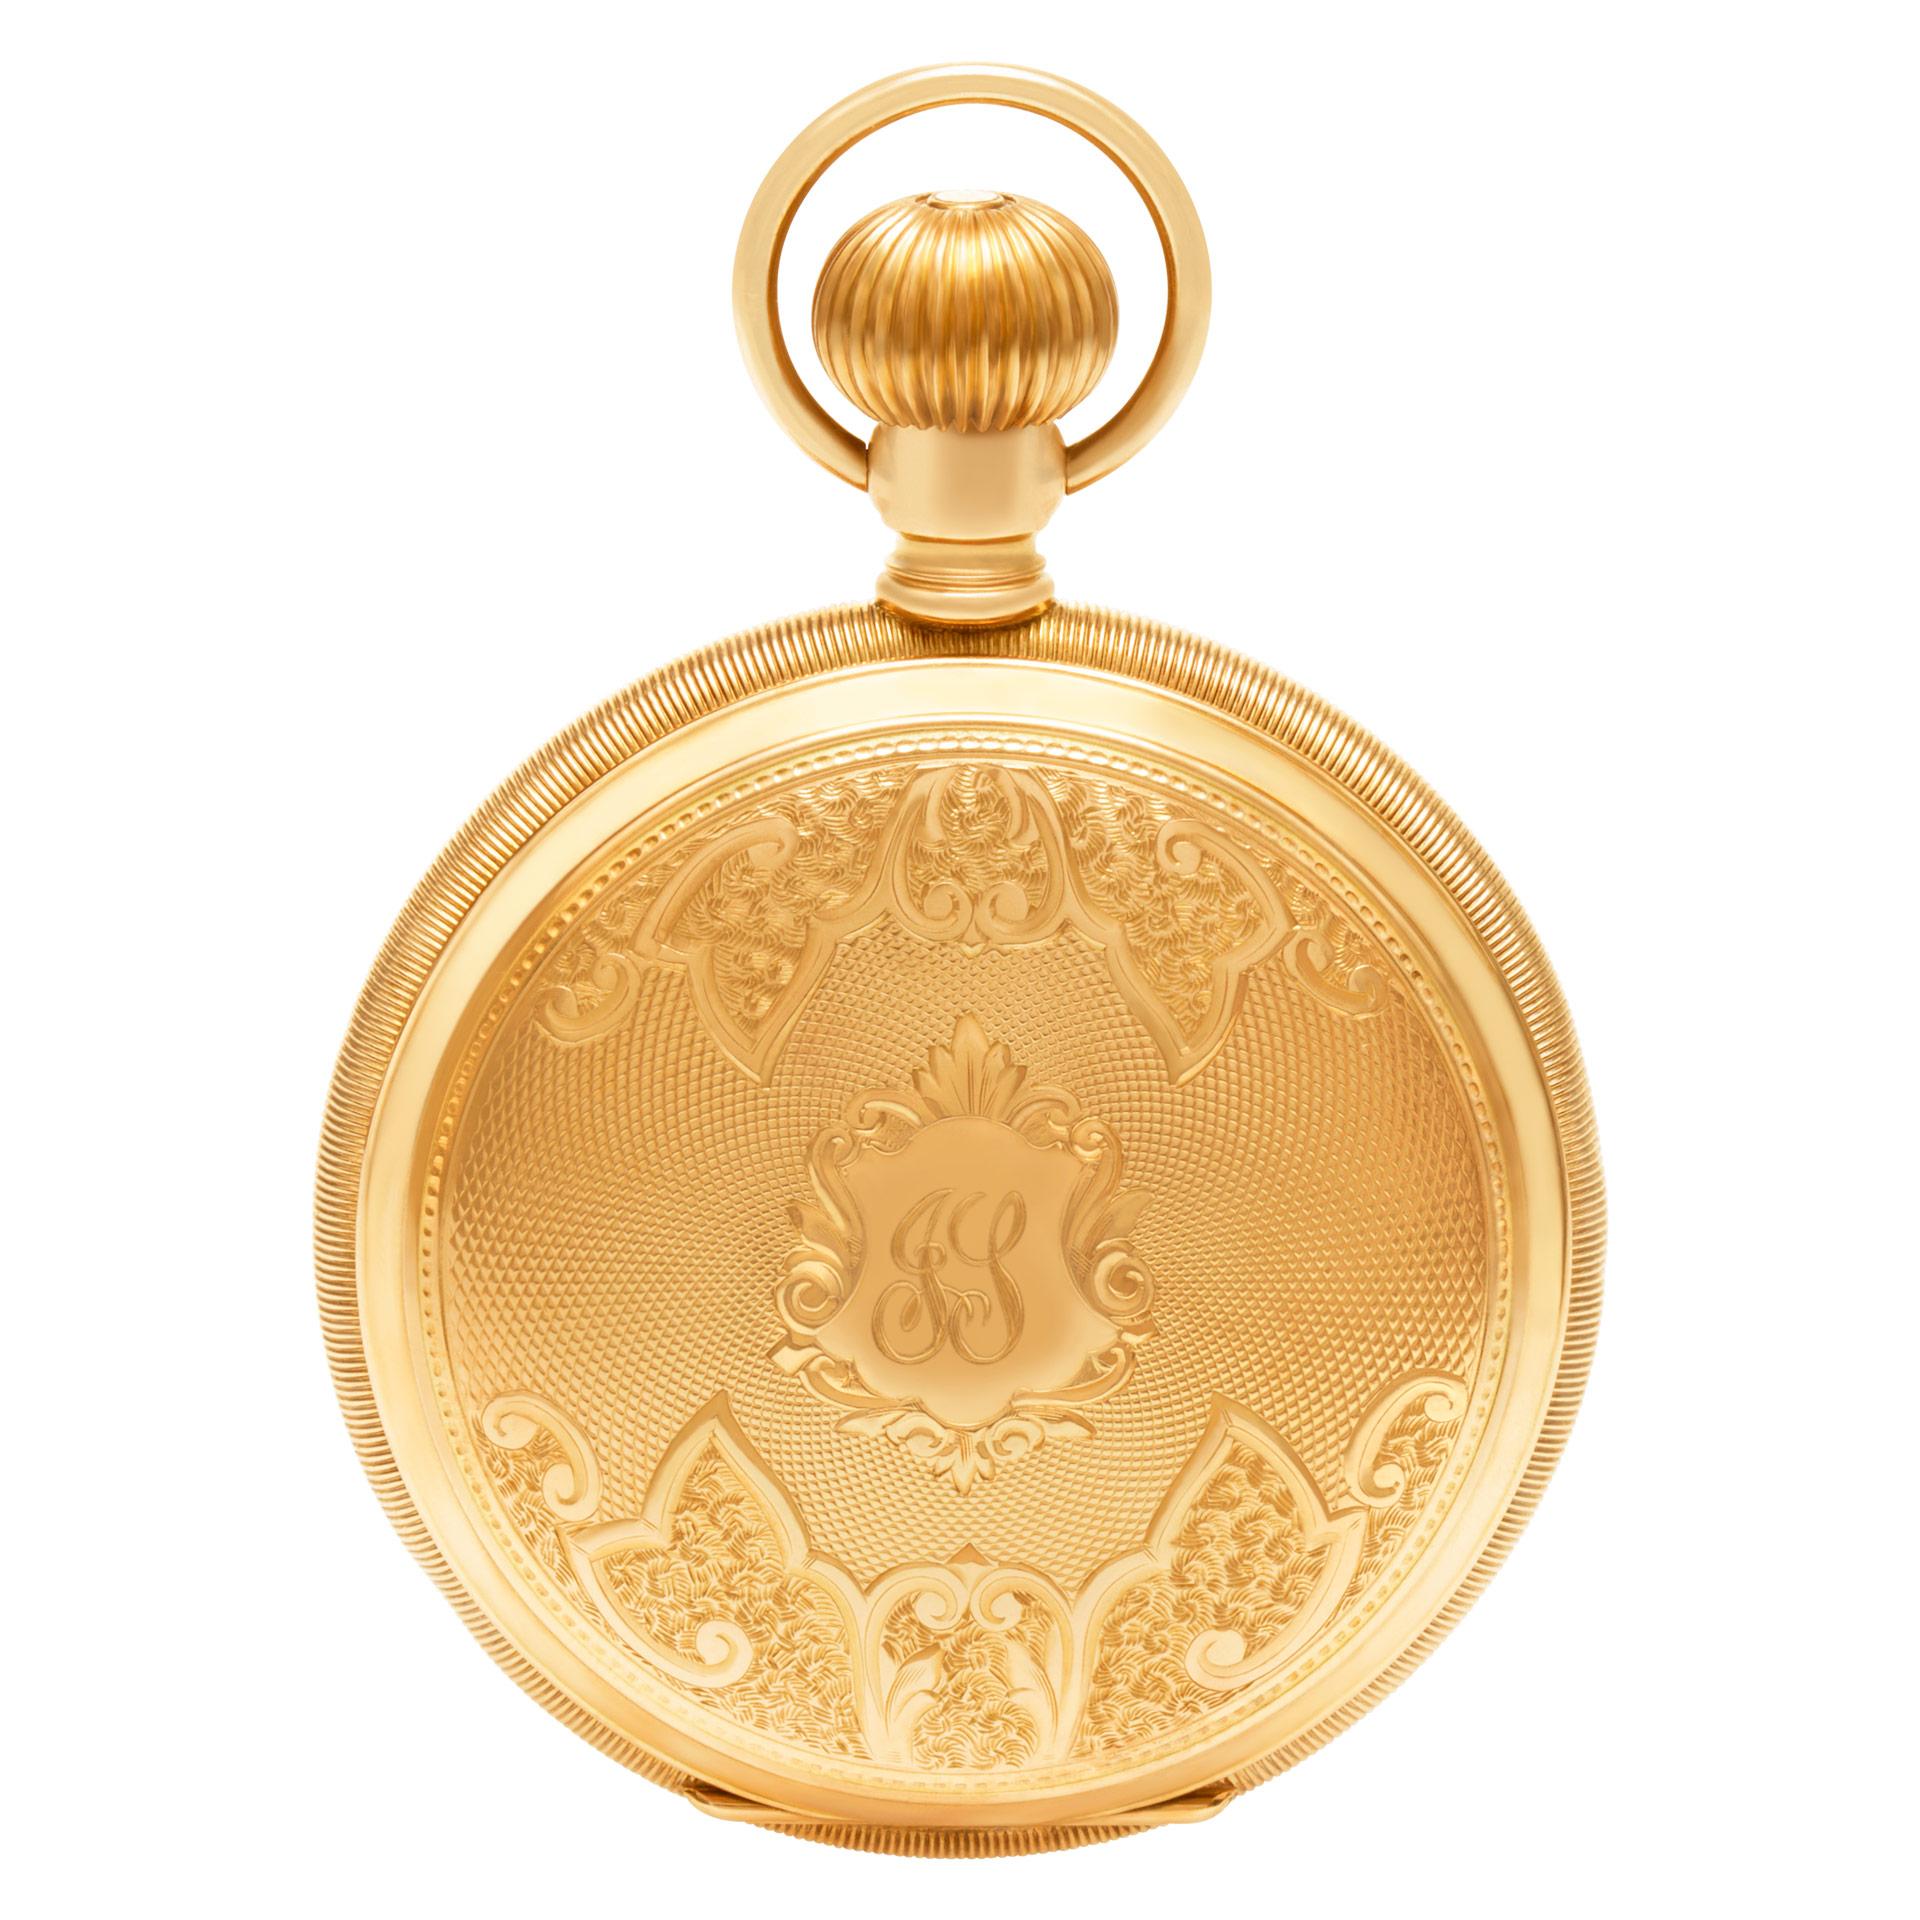 Gents Hamilton Watch Co. pocket watch in 14k yellow gold. Manual w/ subseconds. Size of the case: 56mm Fine Pre-owned Hamilton Watch.   Certified preowned Hamilton watch is made out of yellow gold. This Hamilton watch has a 56  x 56 mm  case with a